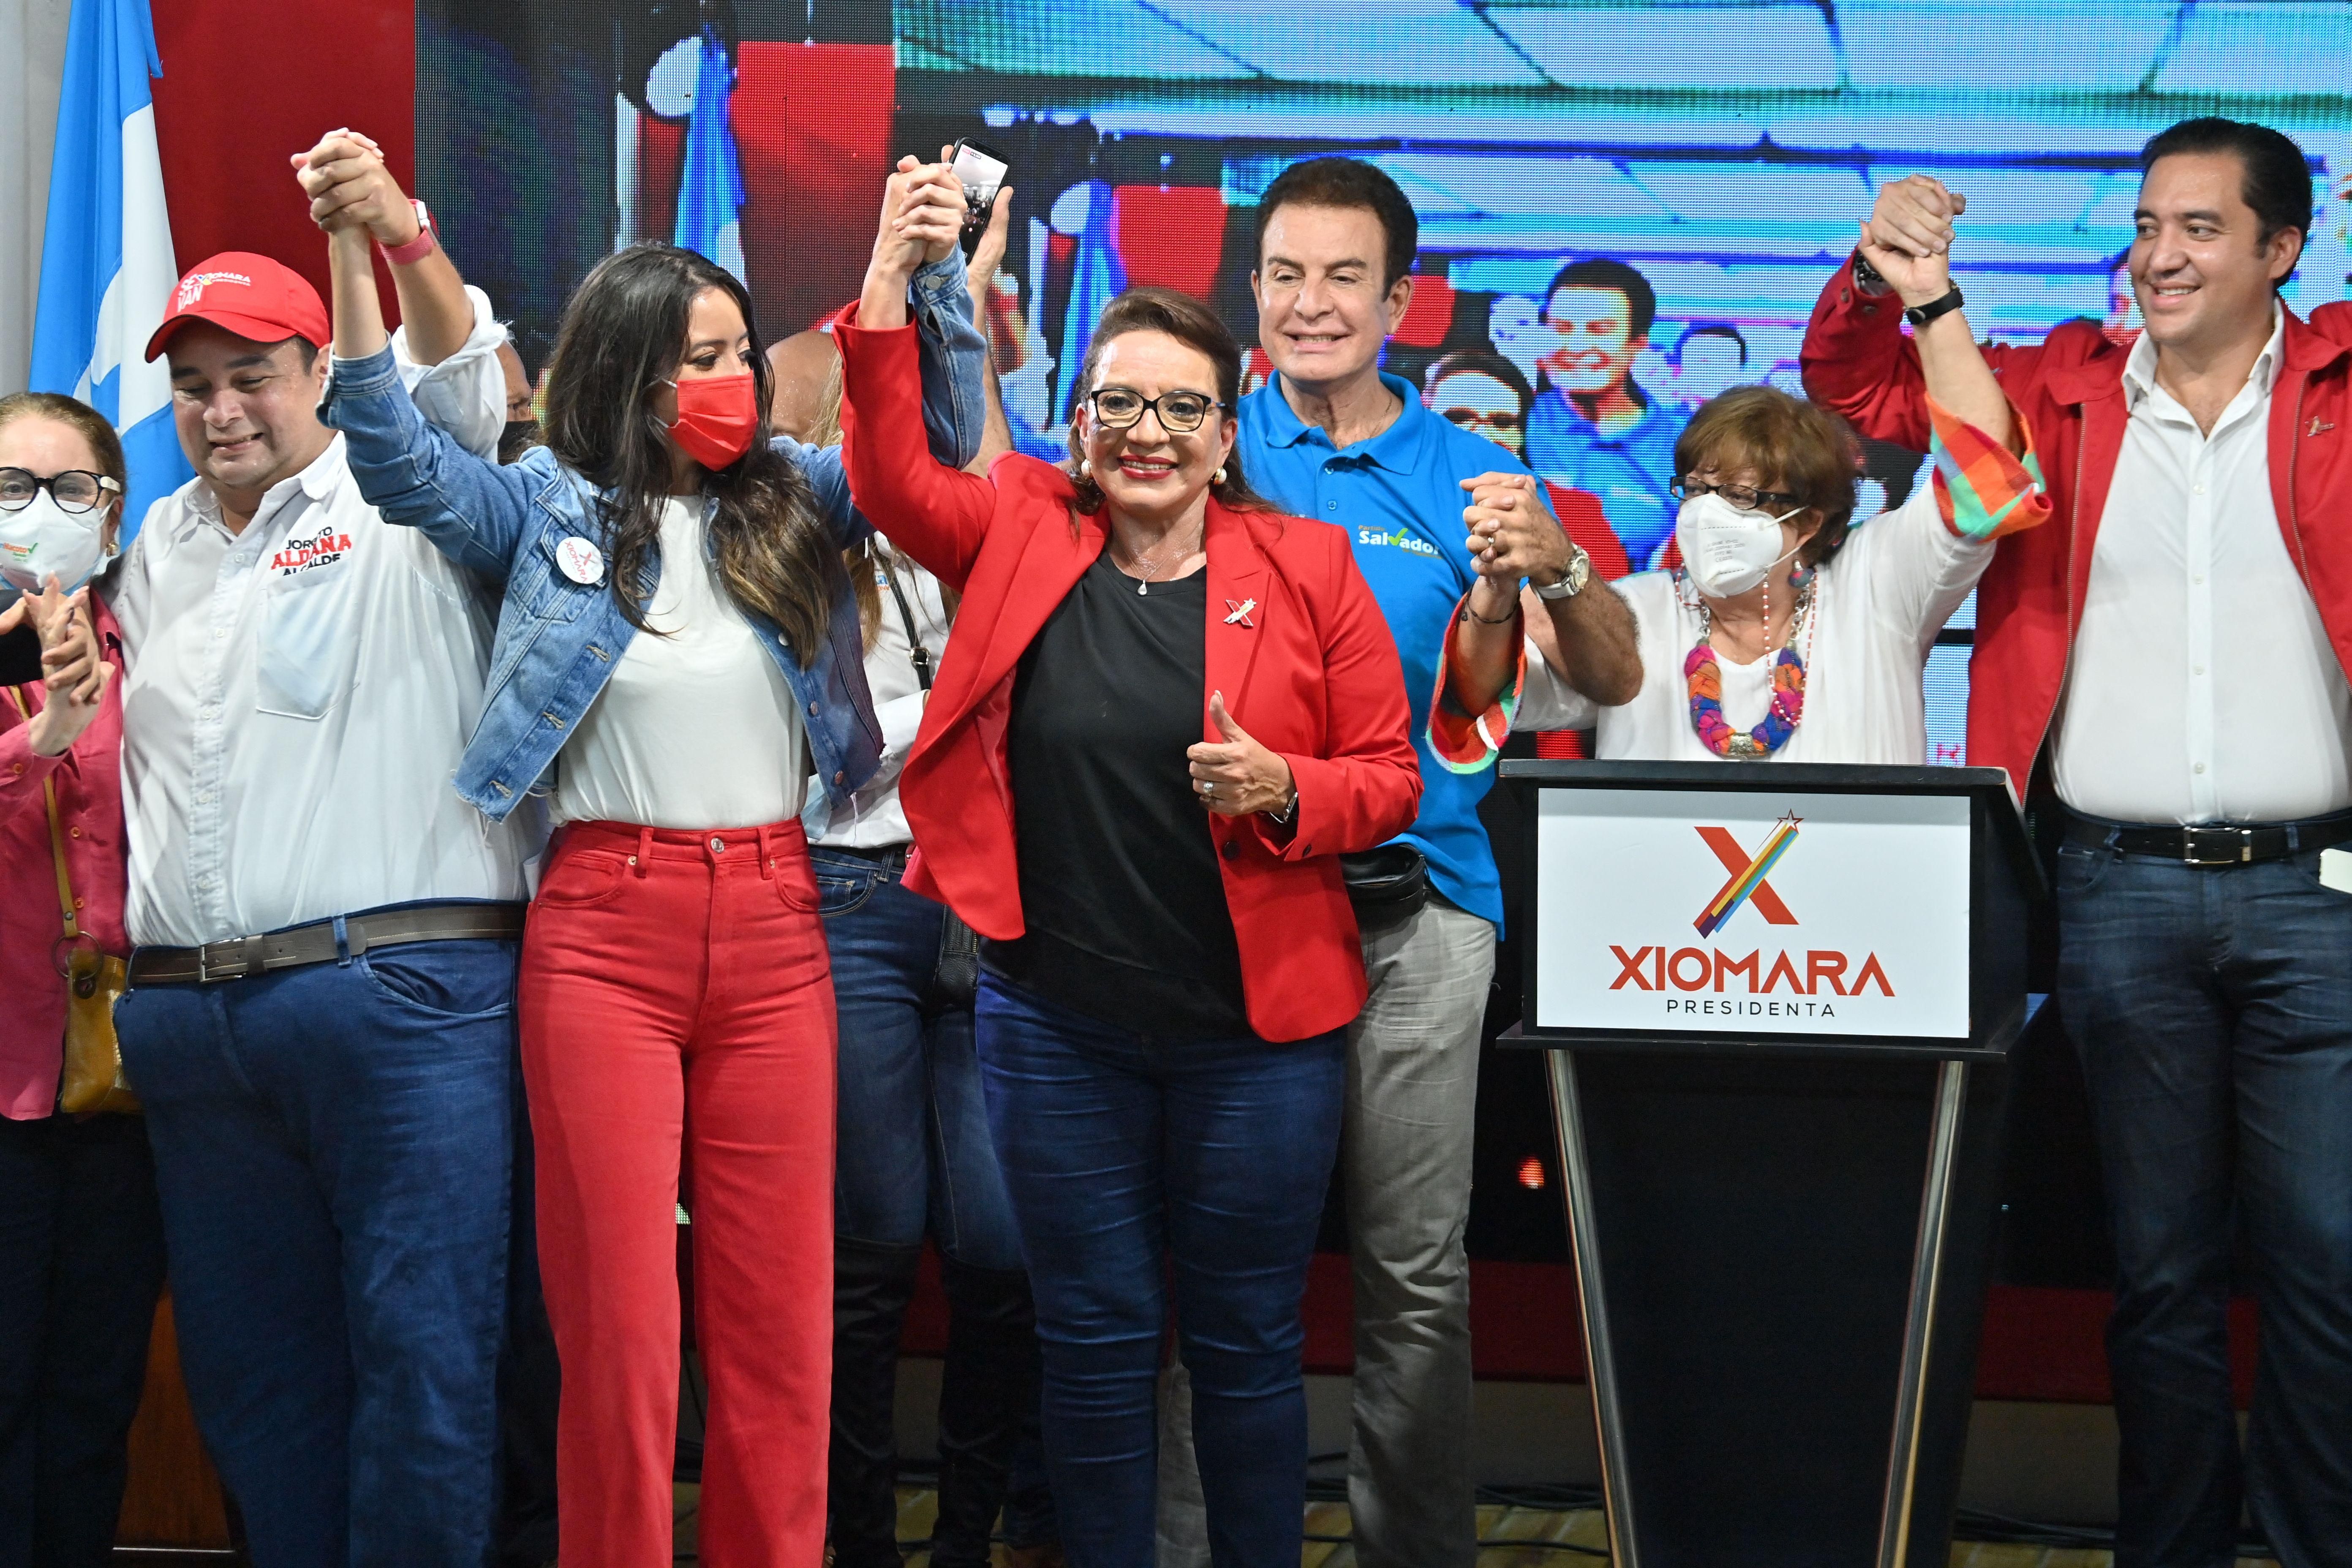 Honduran presidential candidate for the Libre party, Xiomara Castro, celebrates at the party's headquarters after general elections in Tegucigalpa, on November 28, 2021